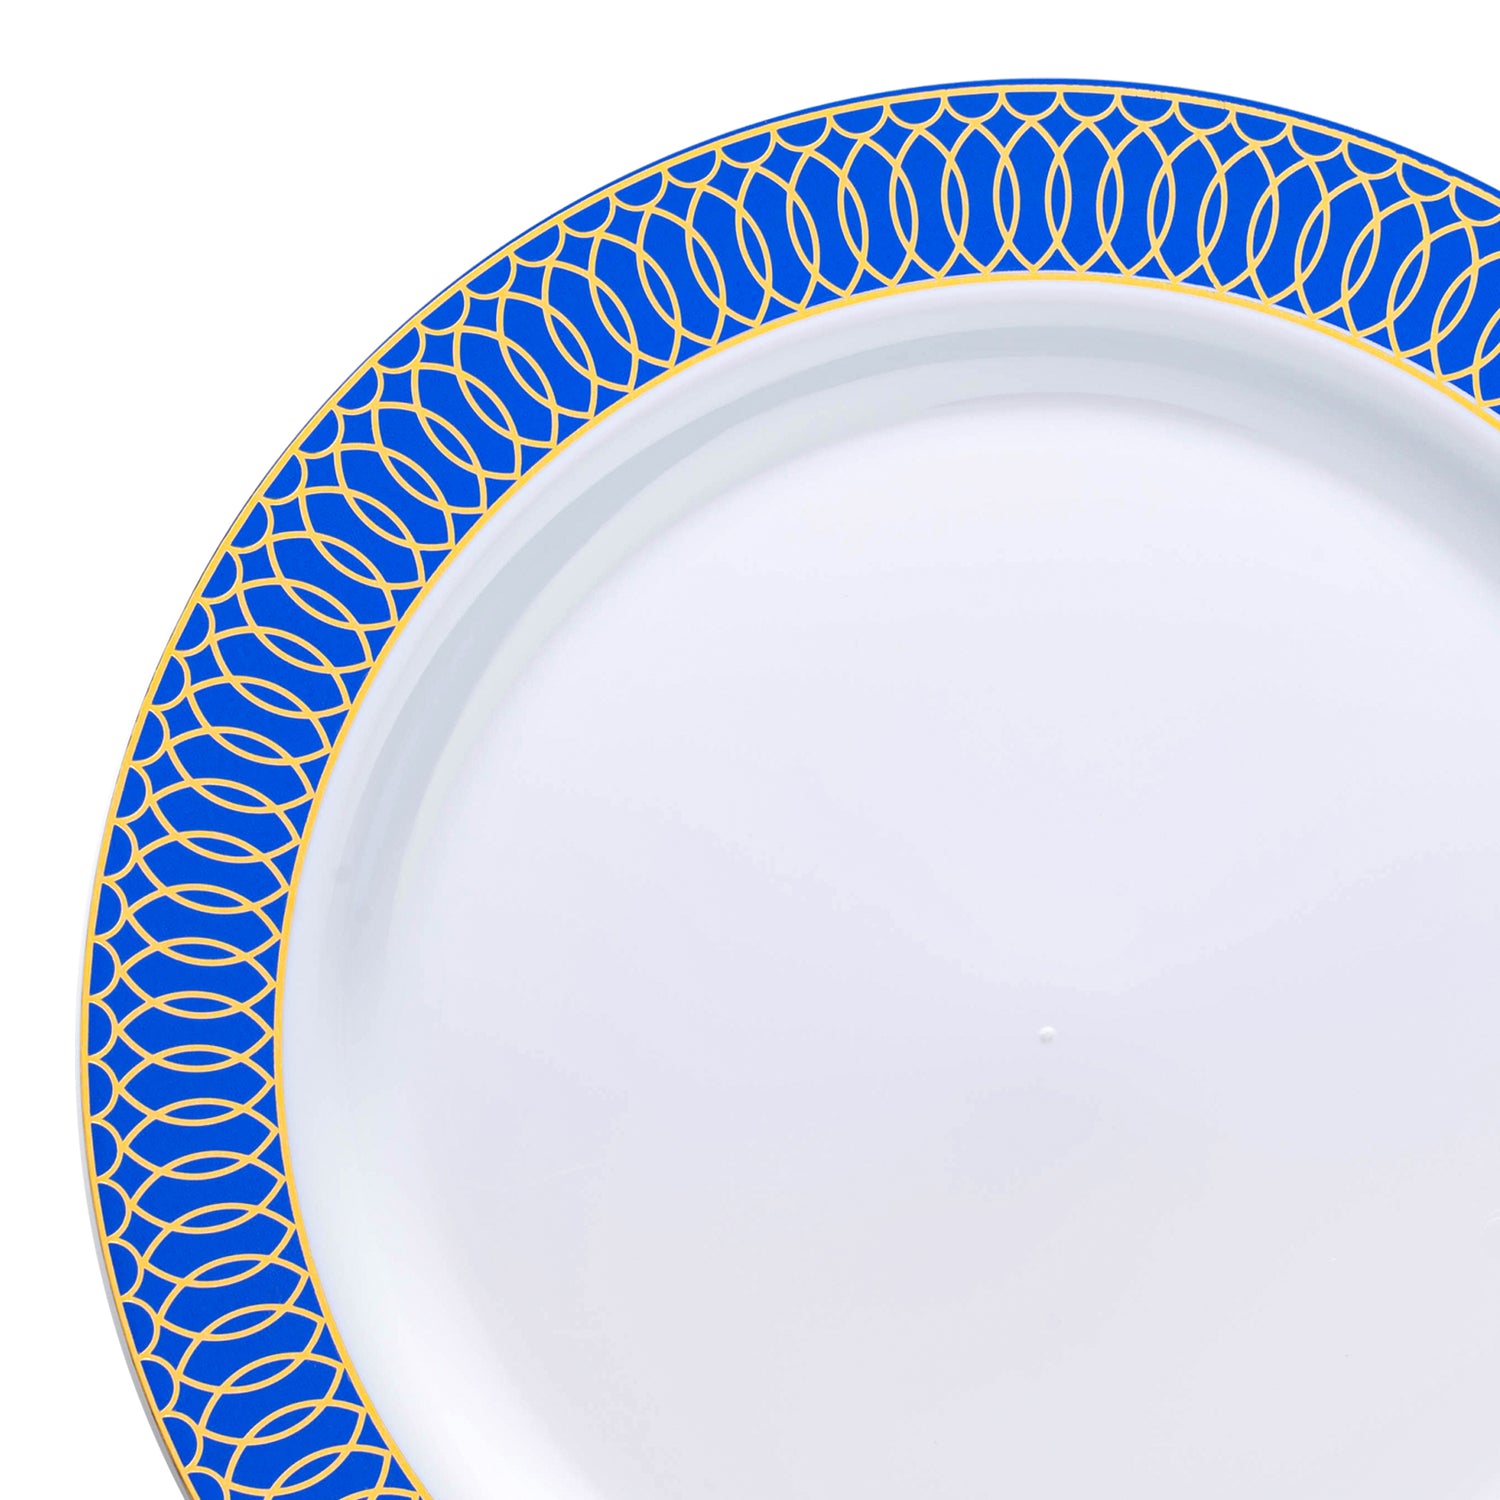 White with Gold Spiral on Blue Rim Plastic Dinner Plates (10.25") | The Kaya Collection